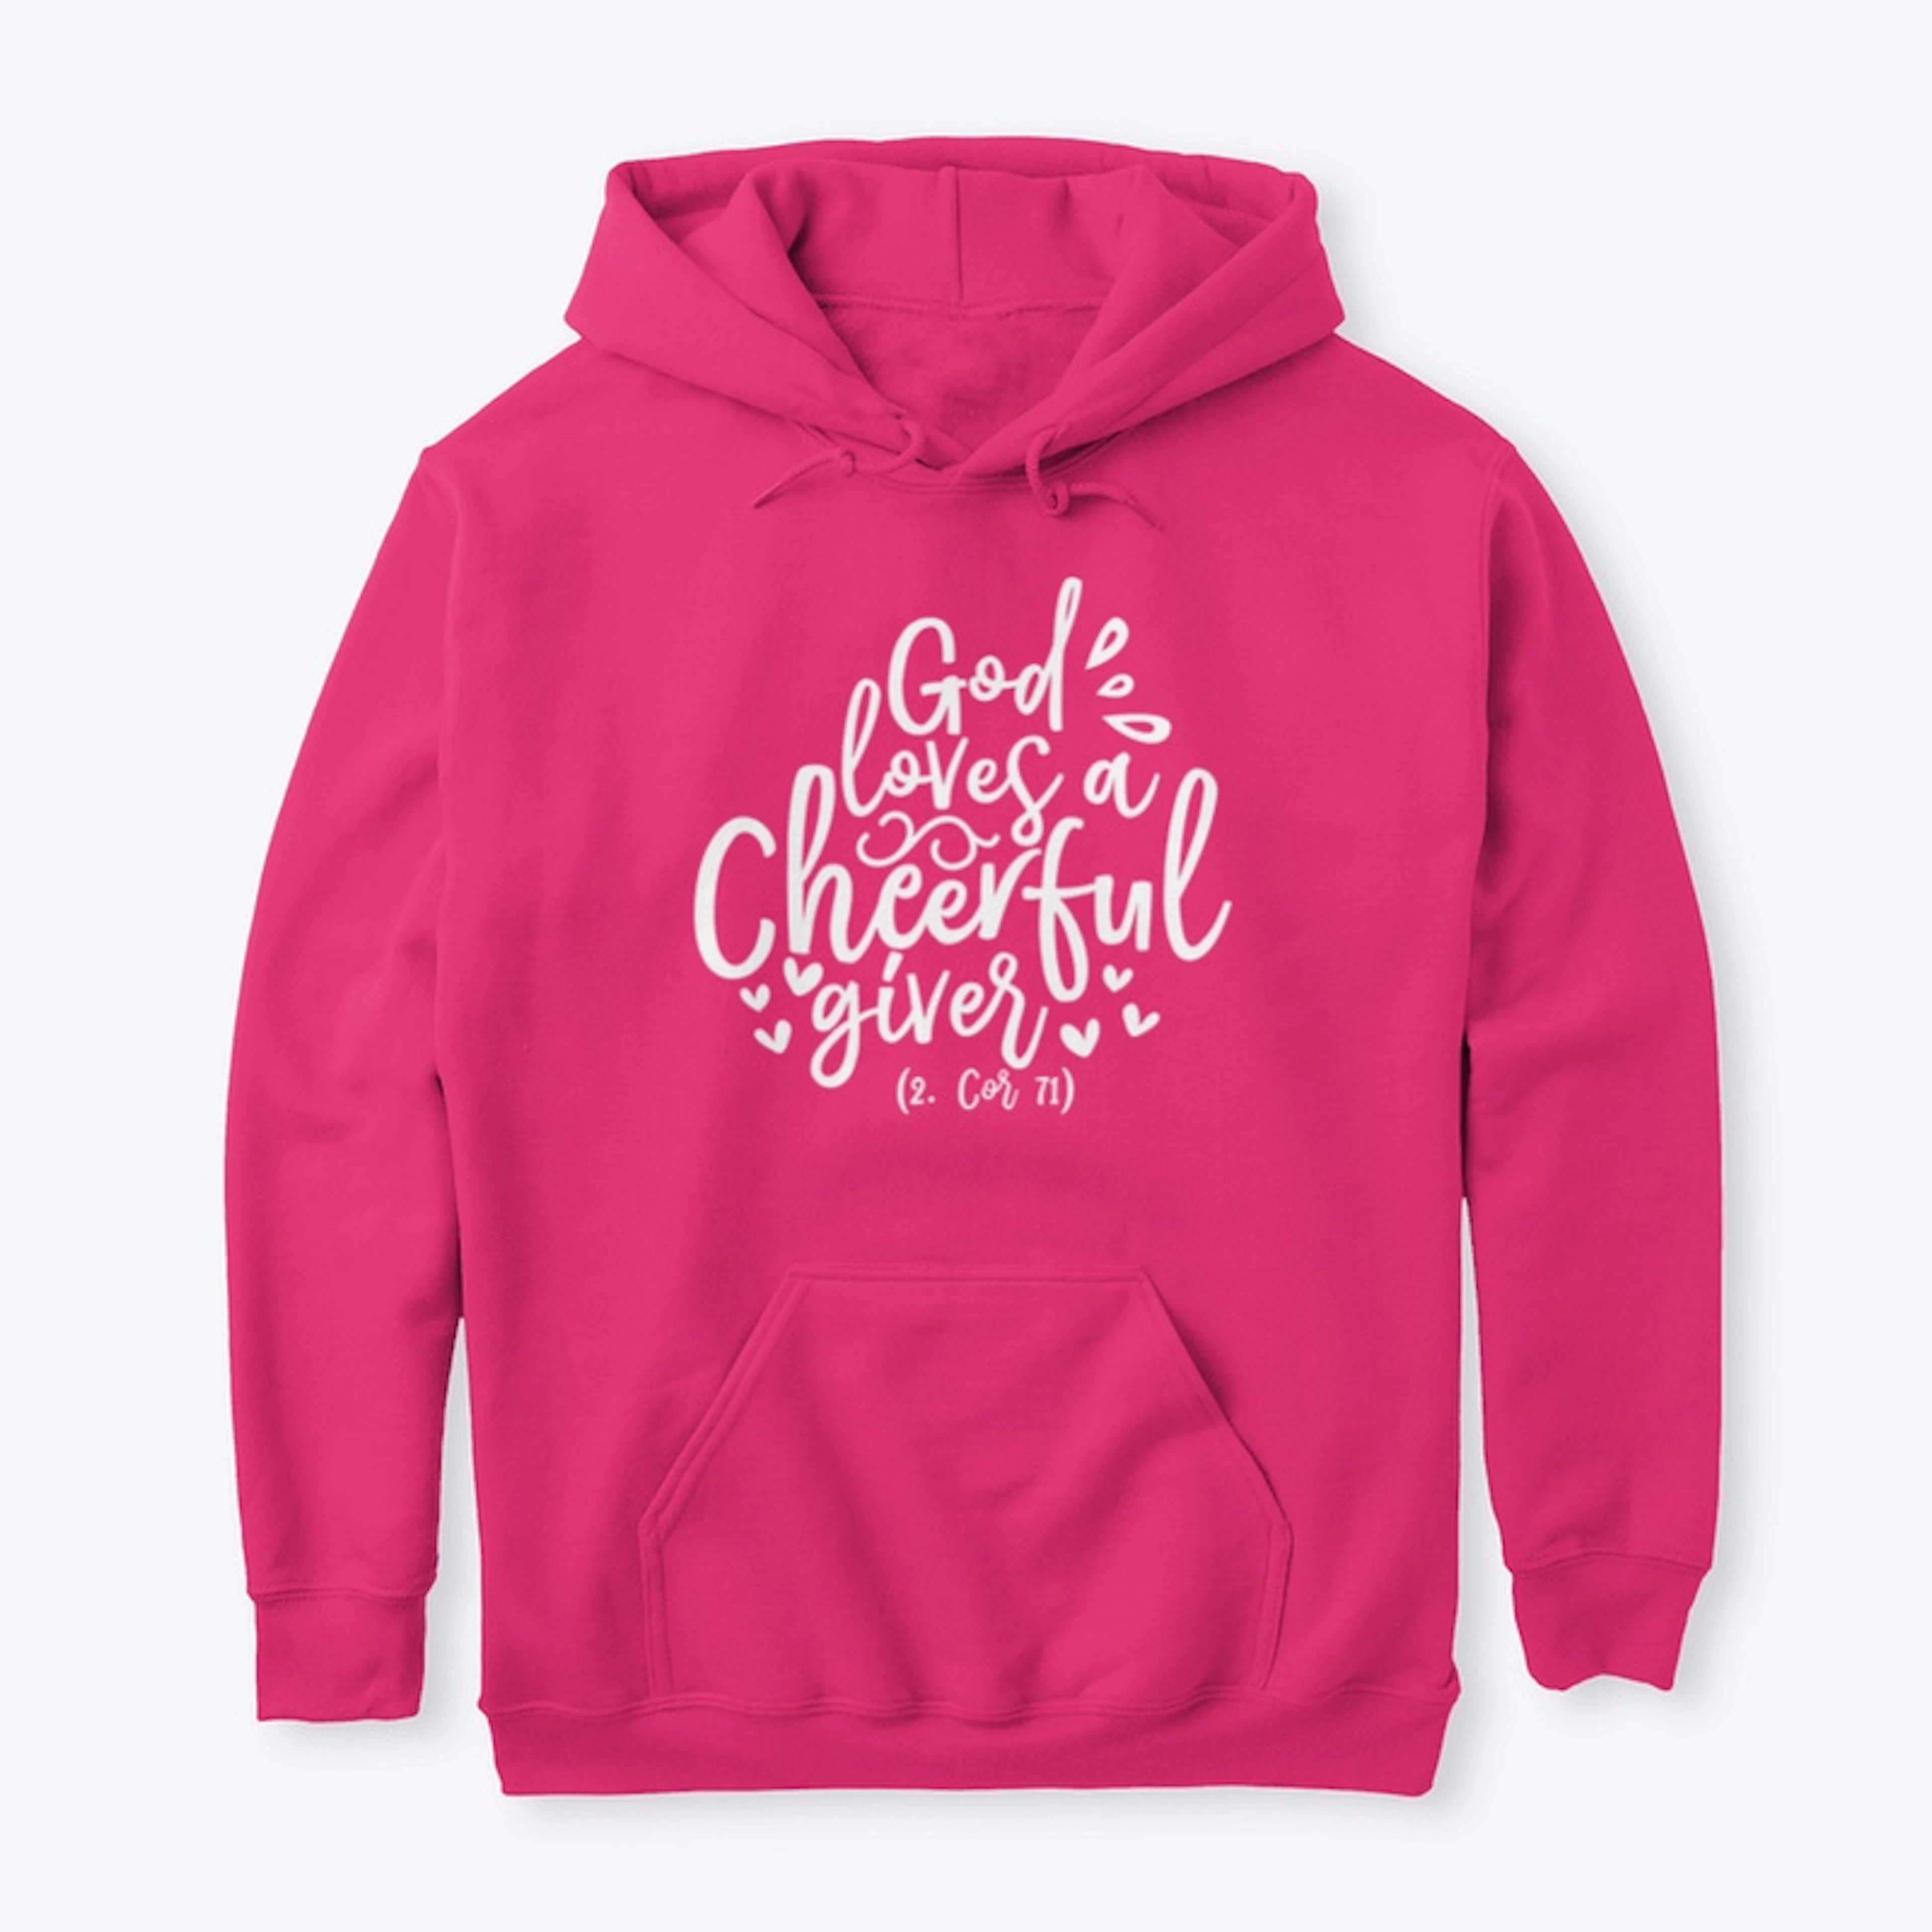 Women's Hoodie Cheerful Giver